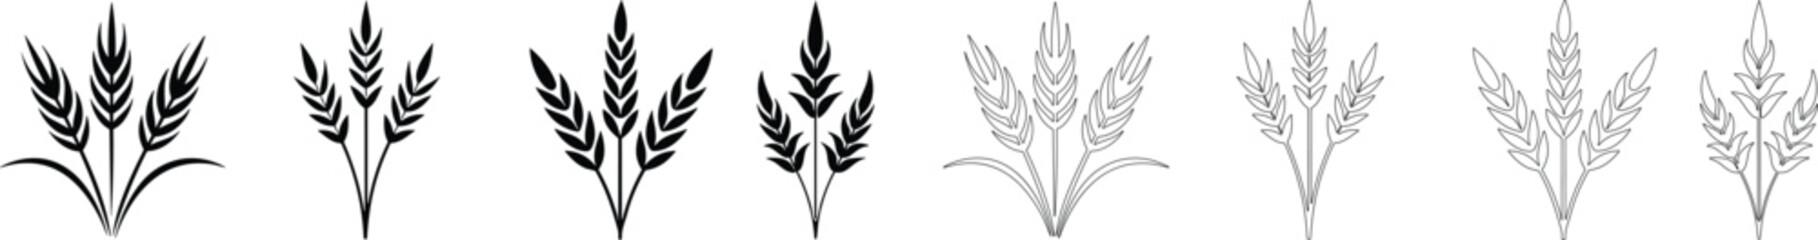 Bunches of wheat or rye ears with whole grain. Wheat wreaths and grain spikes set icons. Vector illustration - Powered by Adobe